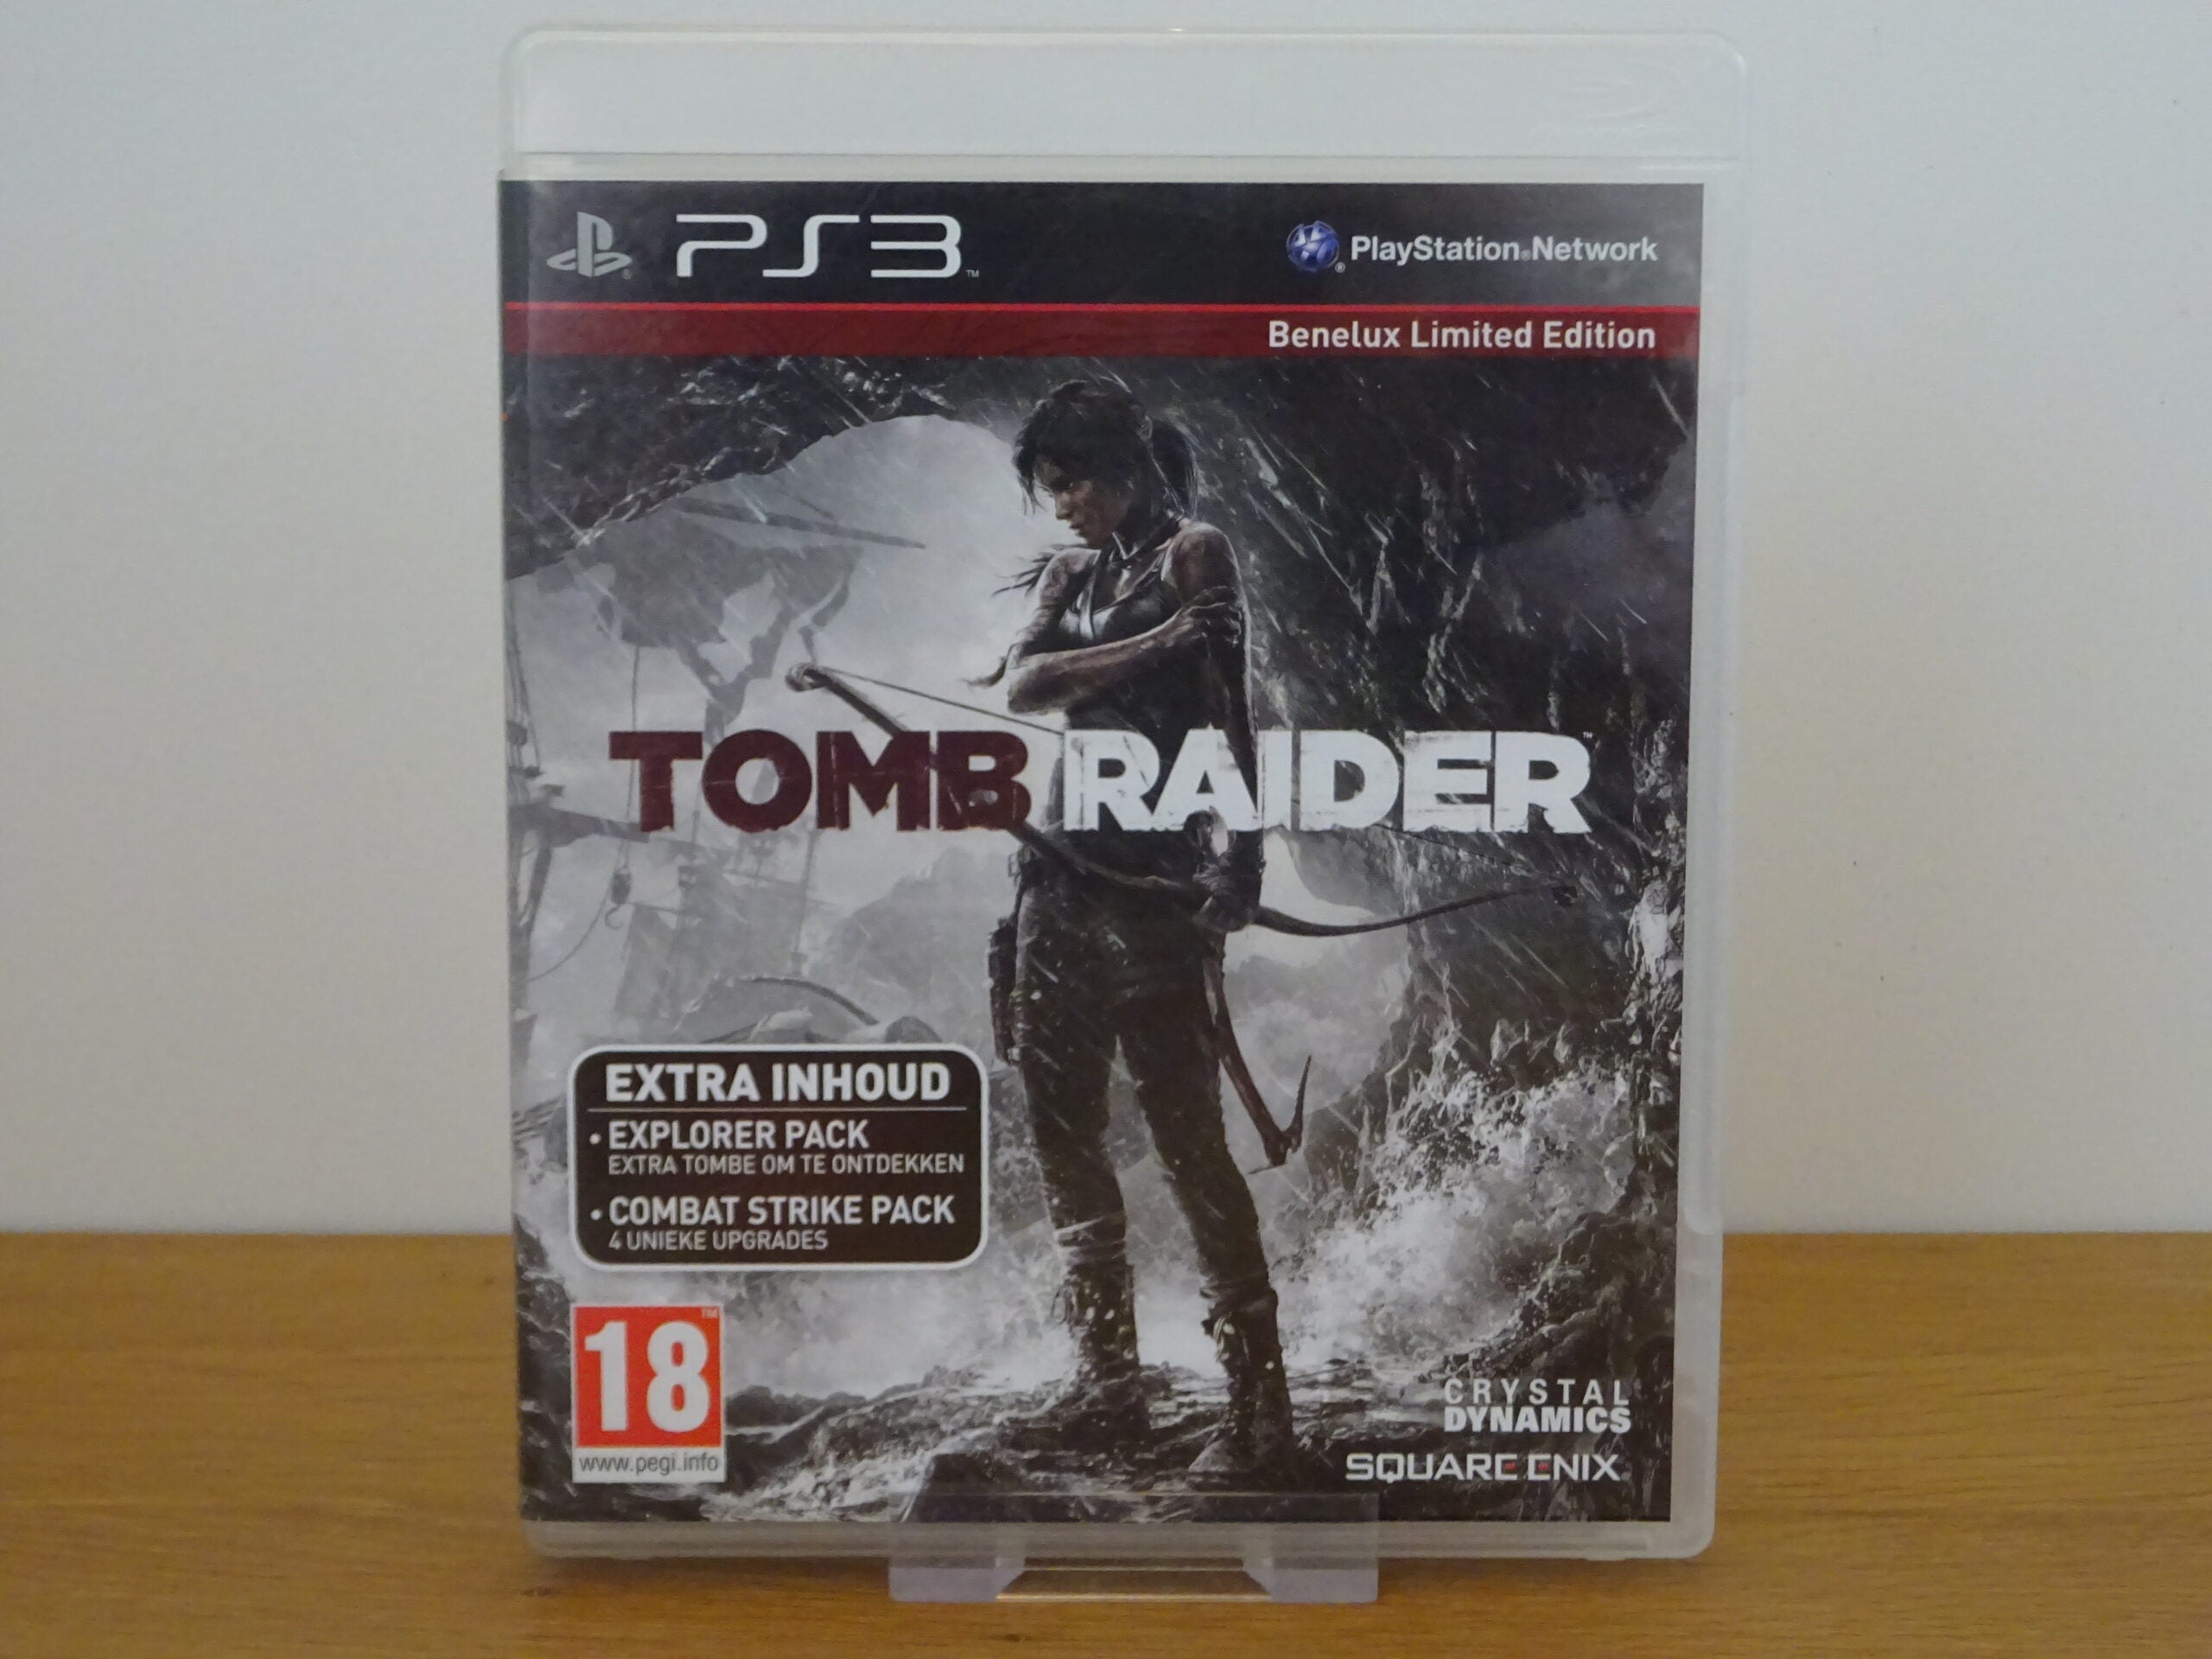 Game | Sony Playstation PS3 | Tomb Raider [Benelux Limited Edition]